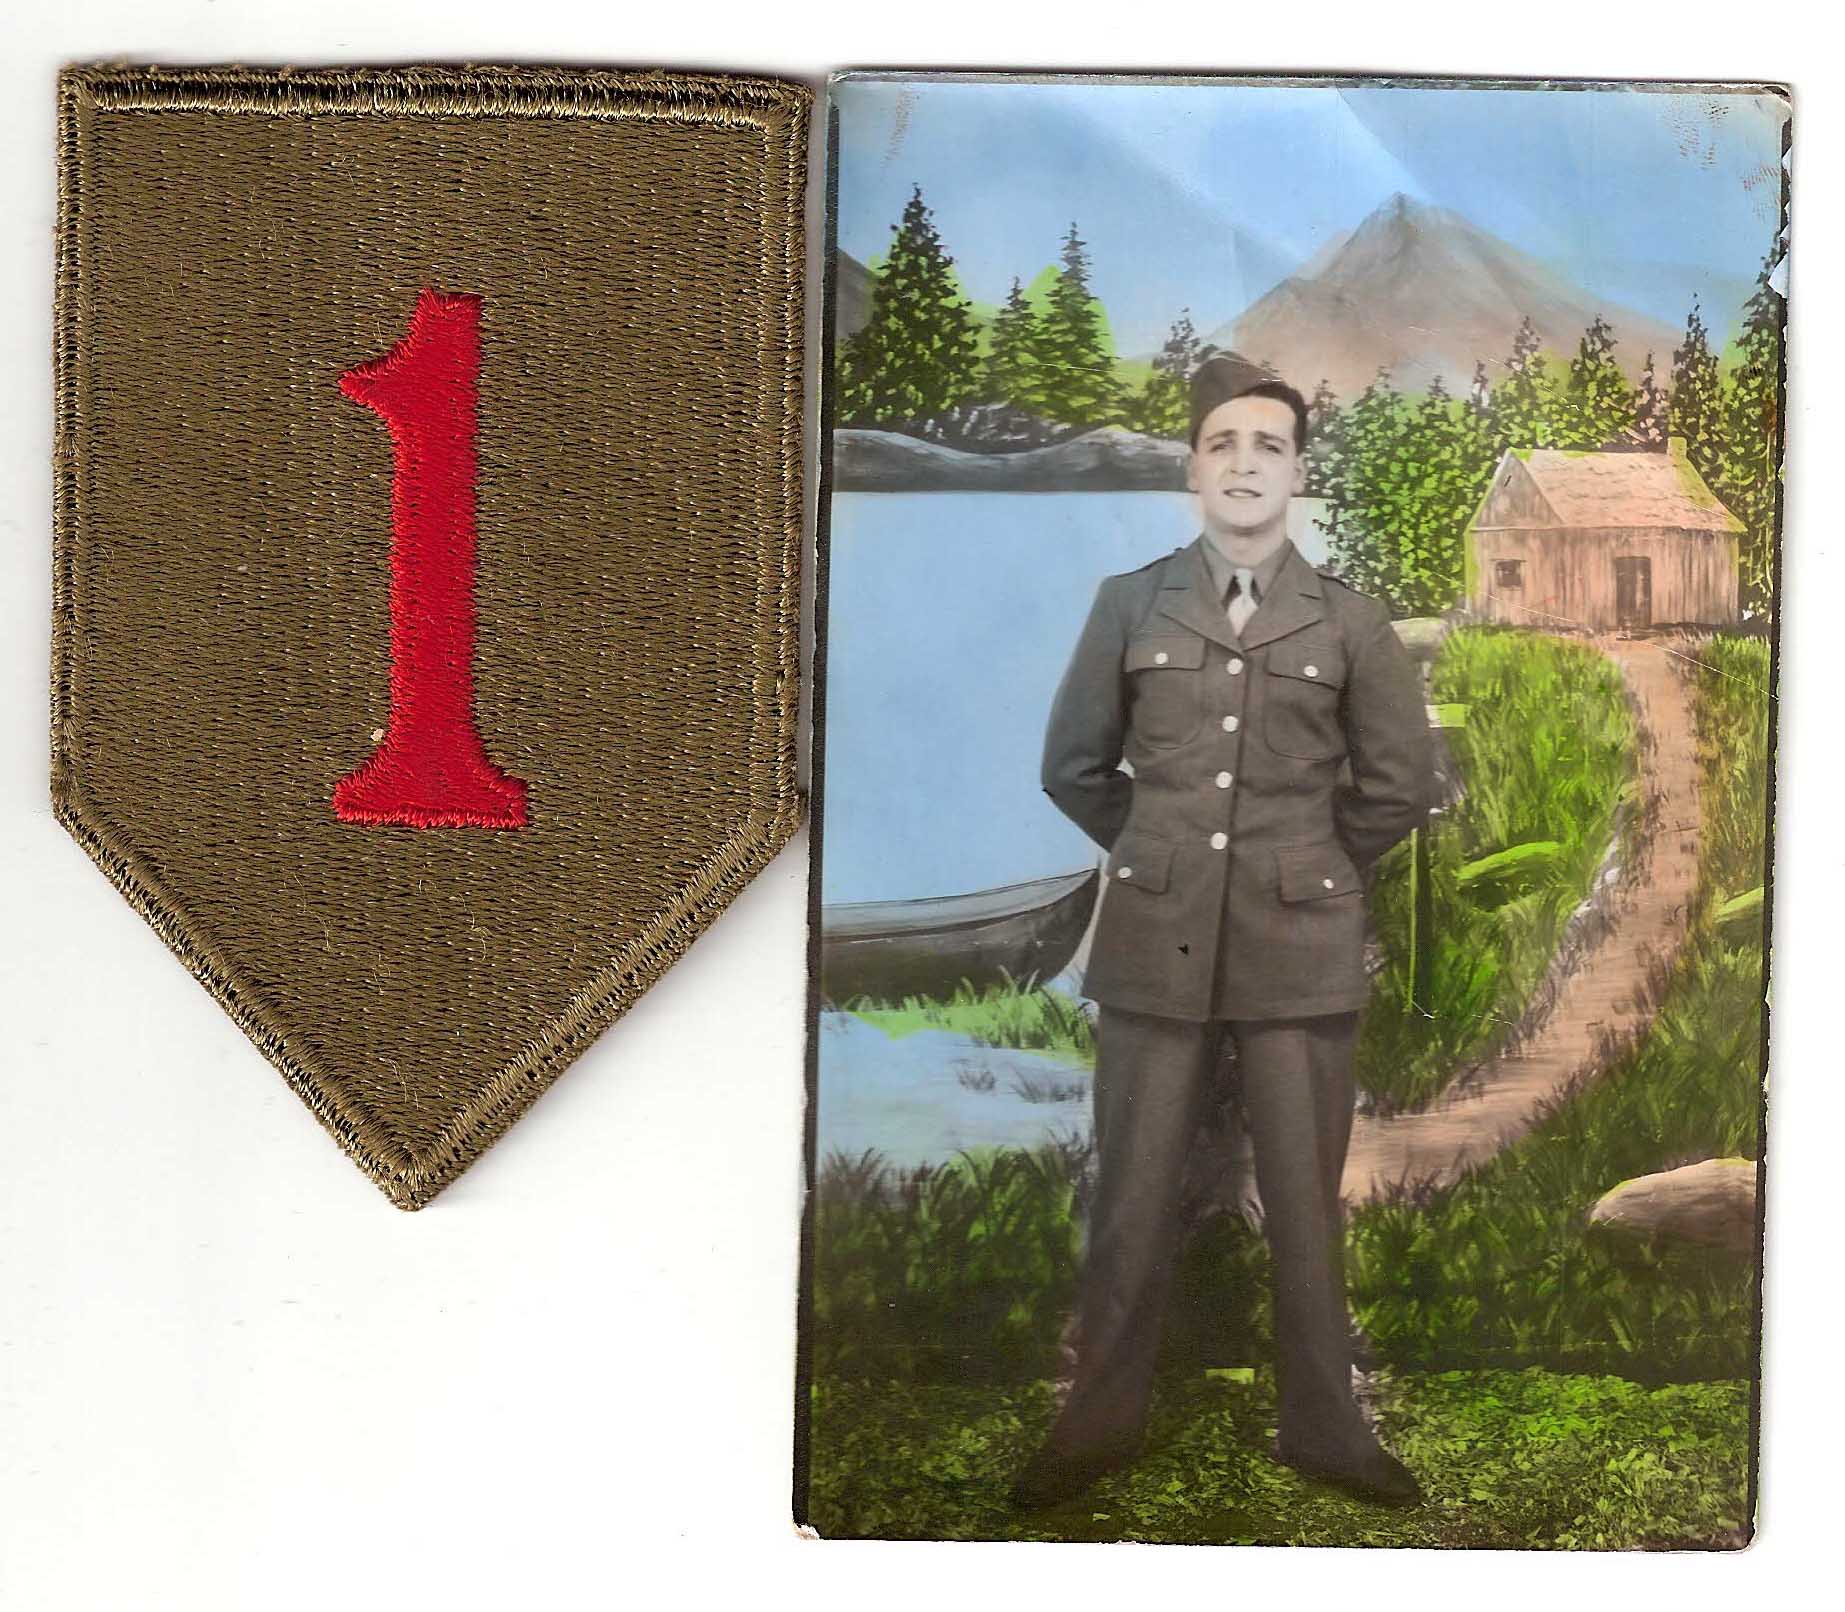 A picture of the 1st Division patch, also known as 'the Big Red One," and a picture of PFC Eake DeMarco in uniform standing in front of a body of water with a mountain in the background.